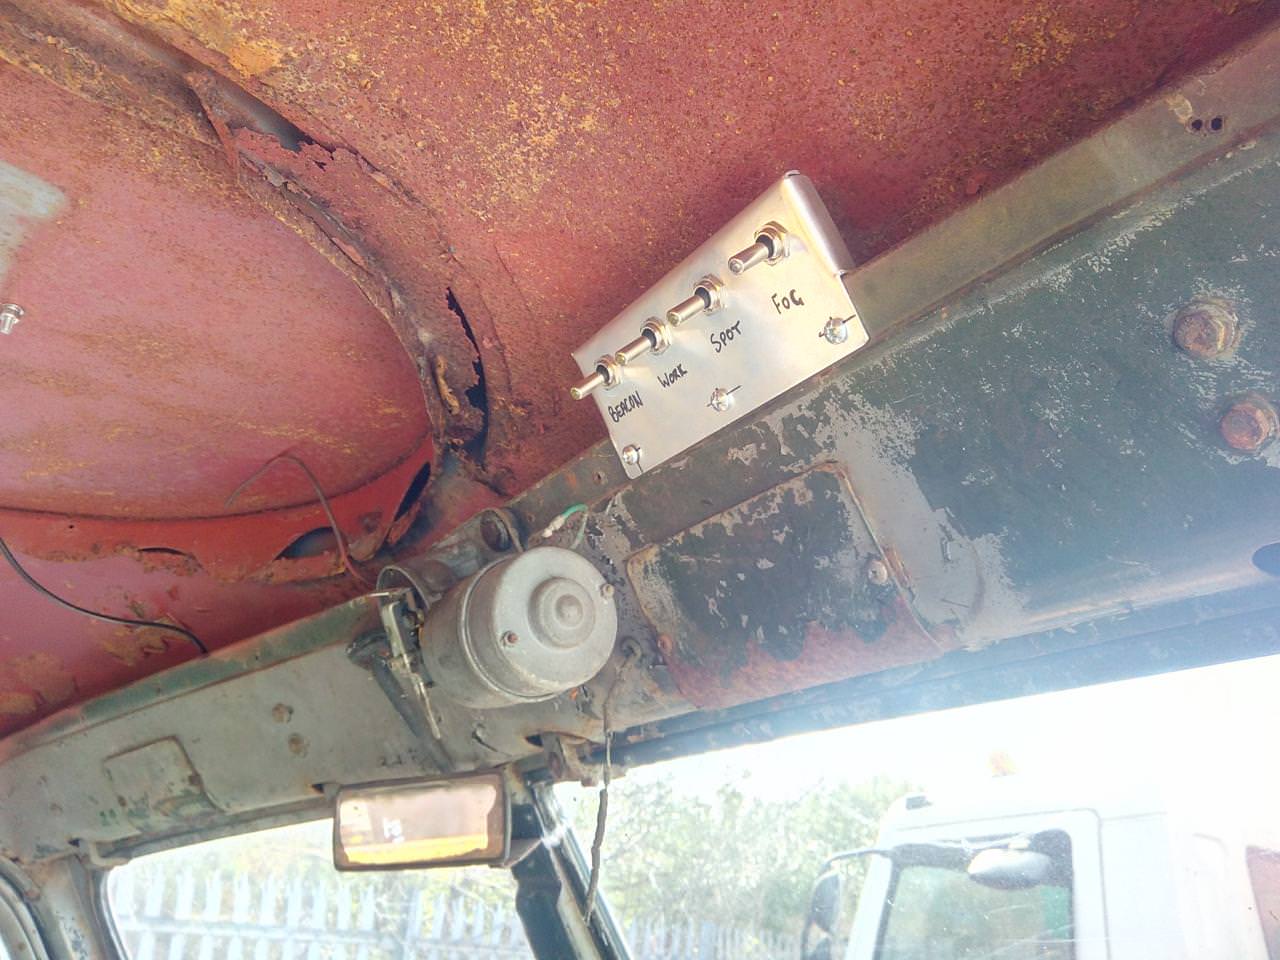 A shiny aluminium switch panel bolted to the truck's upper dash
panel. The panel has 4 switches in it, hand-labelled with sharpie:
Beacon, Work, Spot, and Fog.